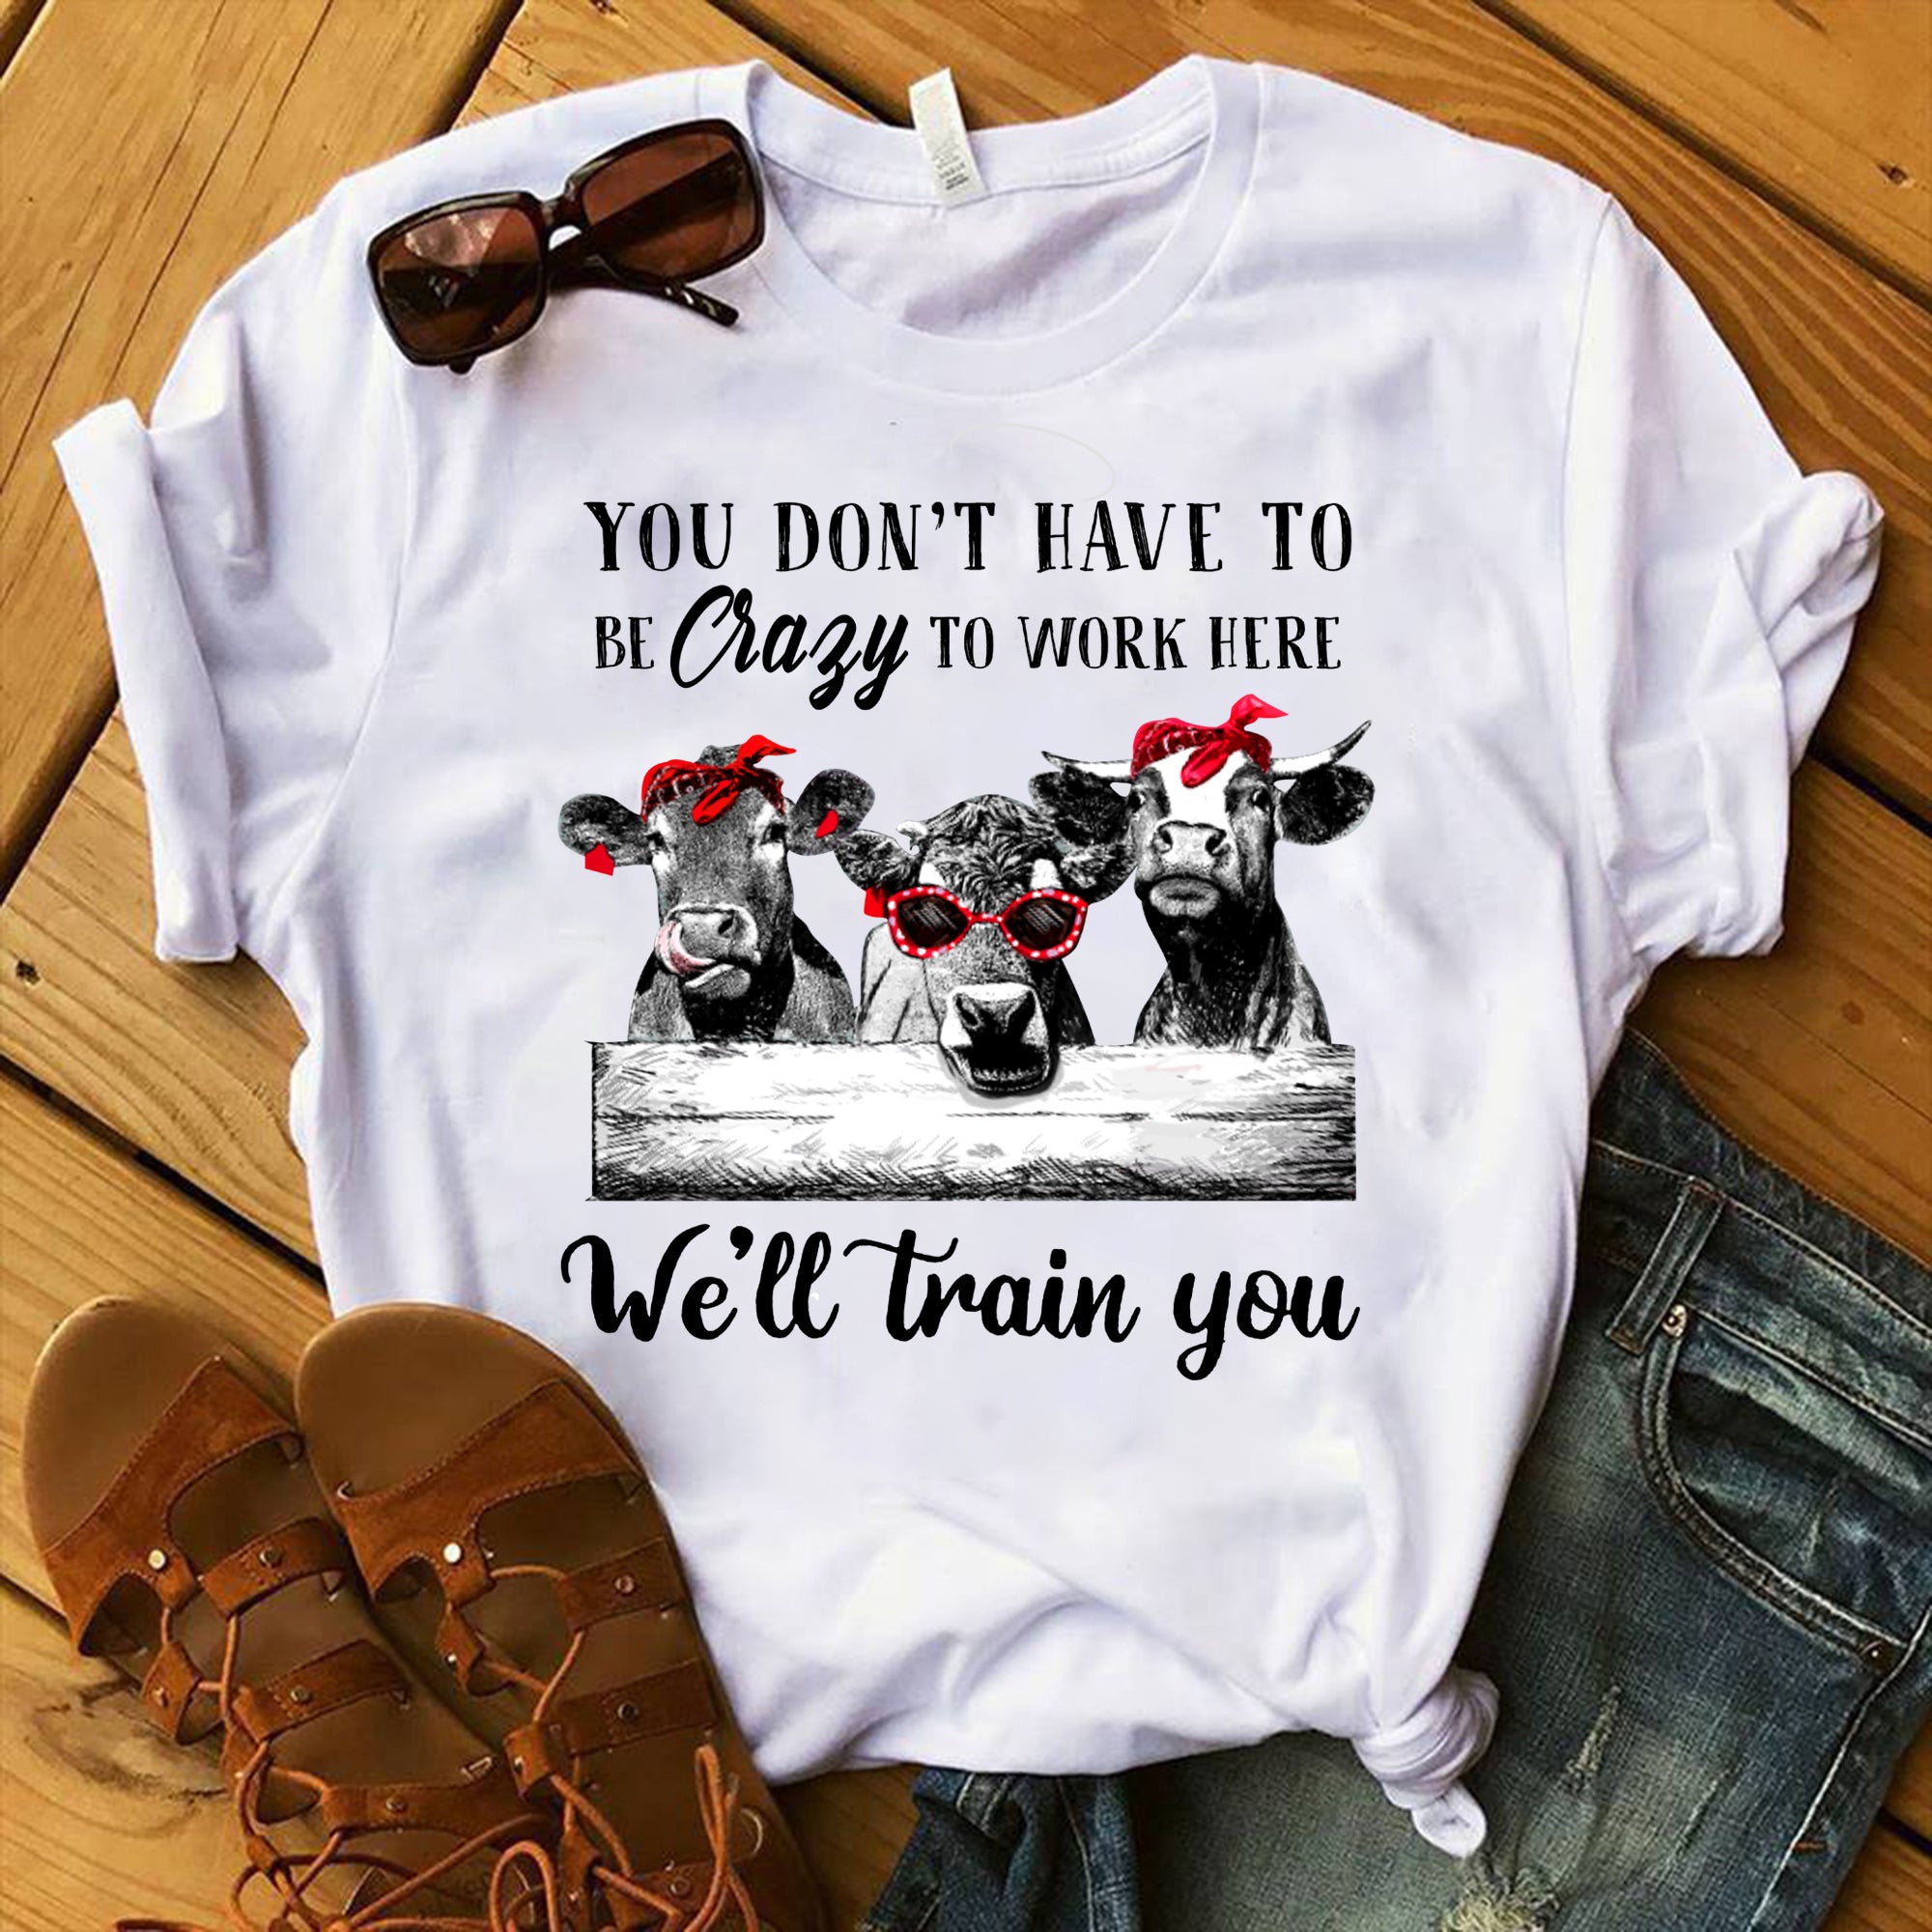 You Don’T Have To Be Crazy To Work Here We’Ll Train You Shirt, Heifer Shirt, Cow Heifer Shirt, Cow Cattle Shirt, Cow Farm Shirt, T-Shirt, Tee